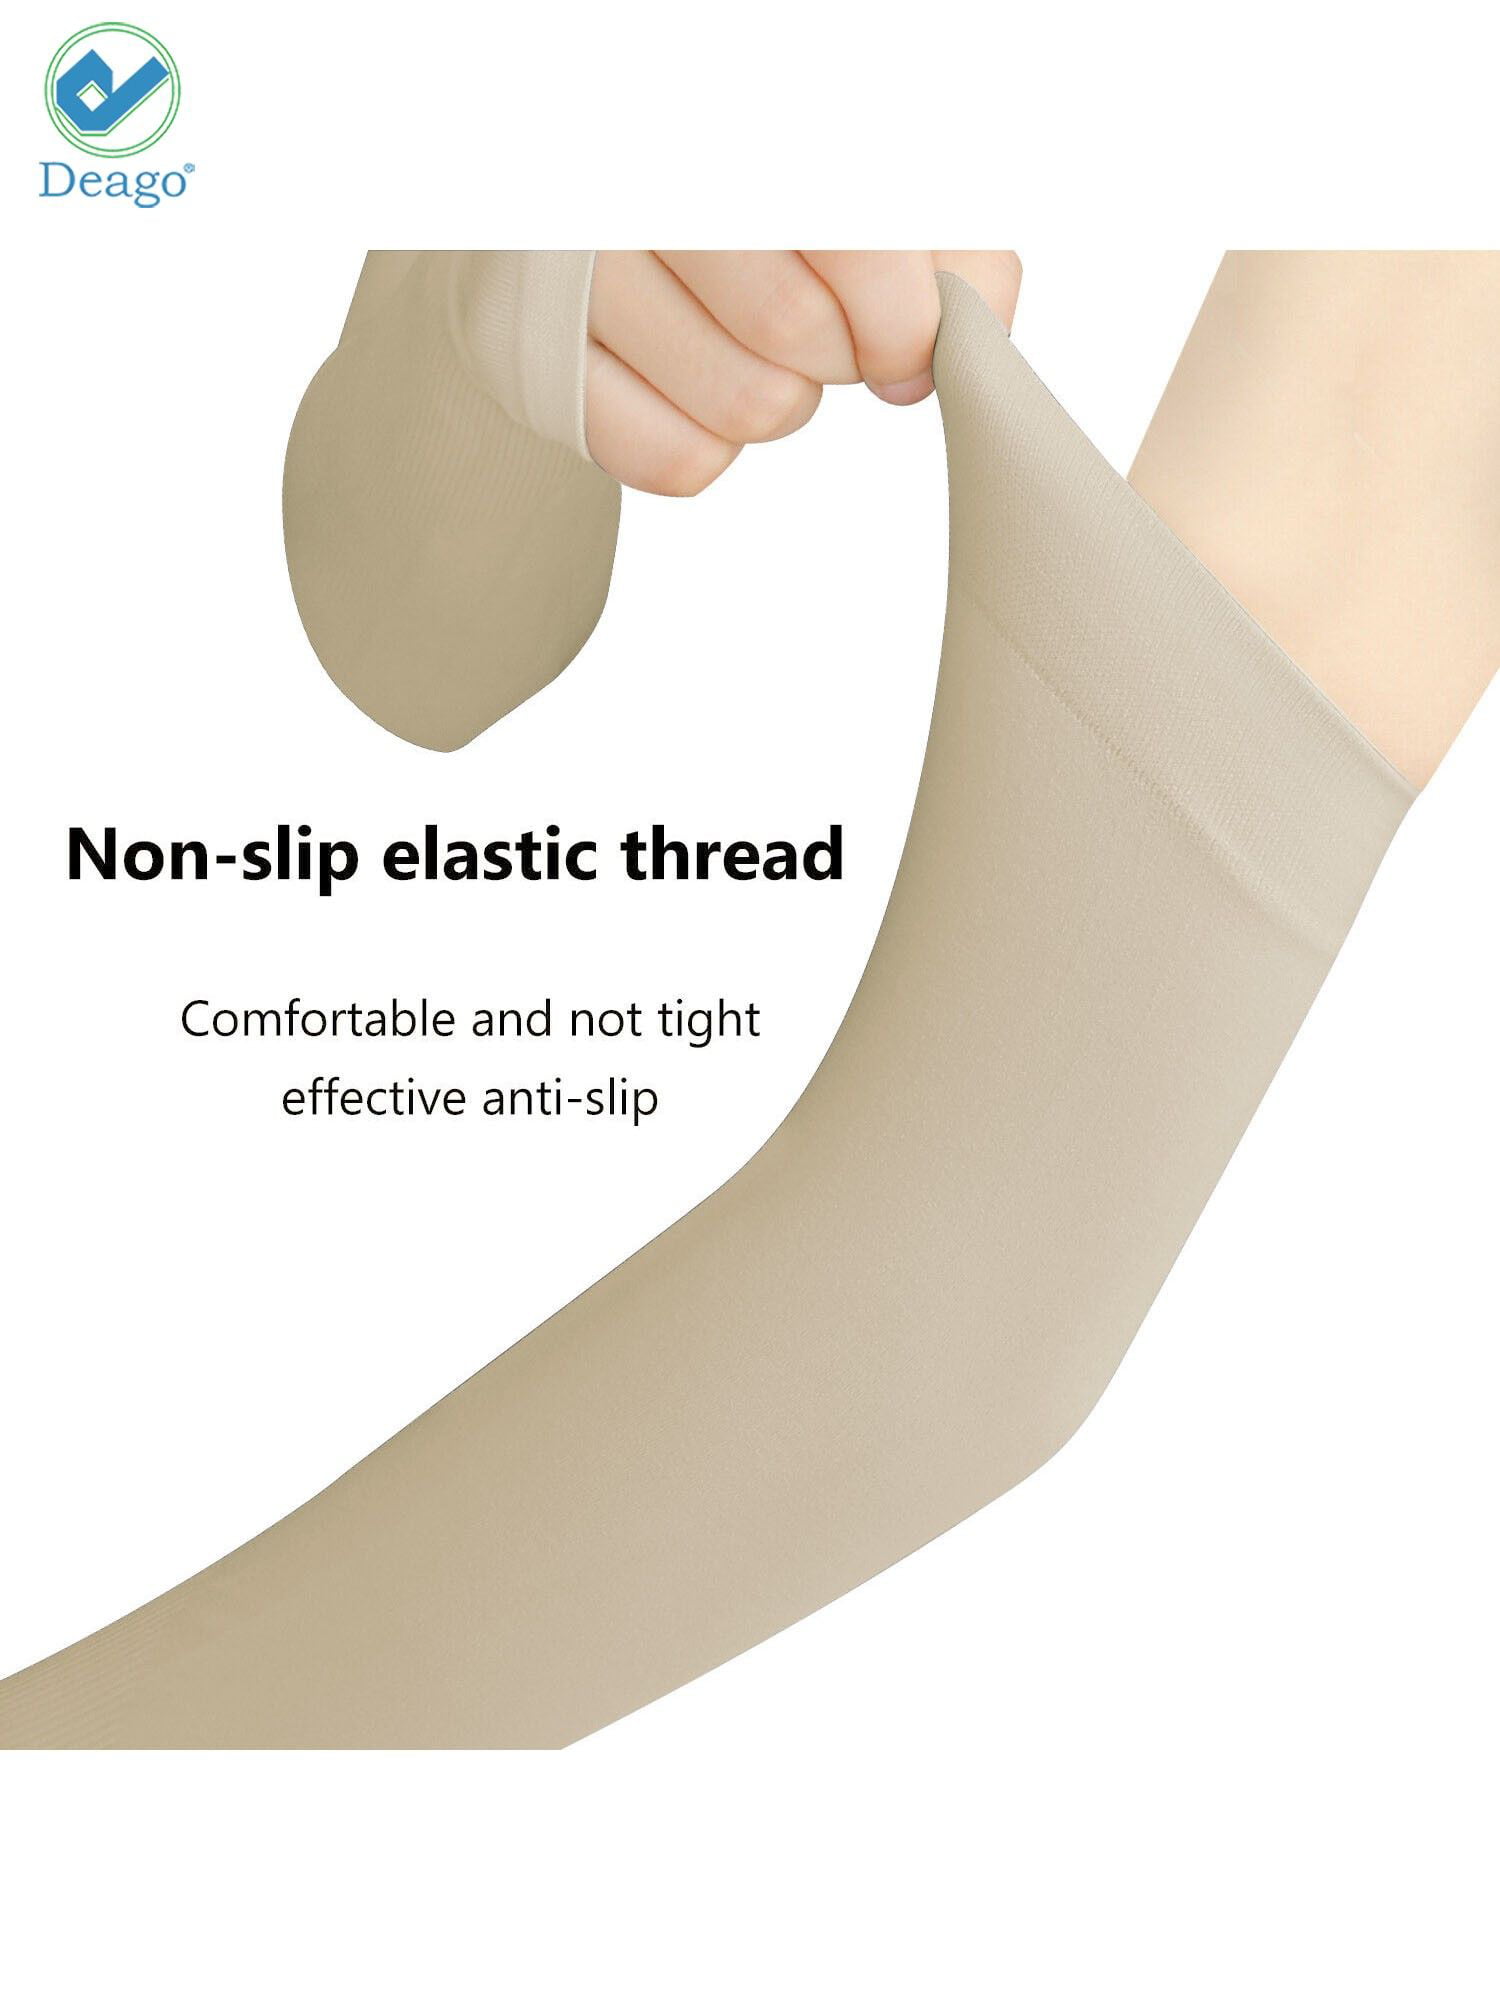 COOLOMG Anti-Slip Arm Sleeves Cover Skin Protection 